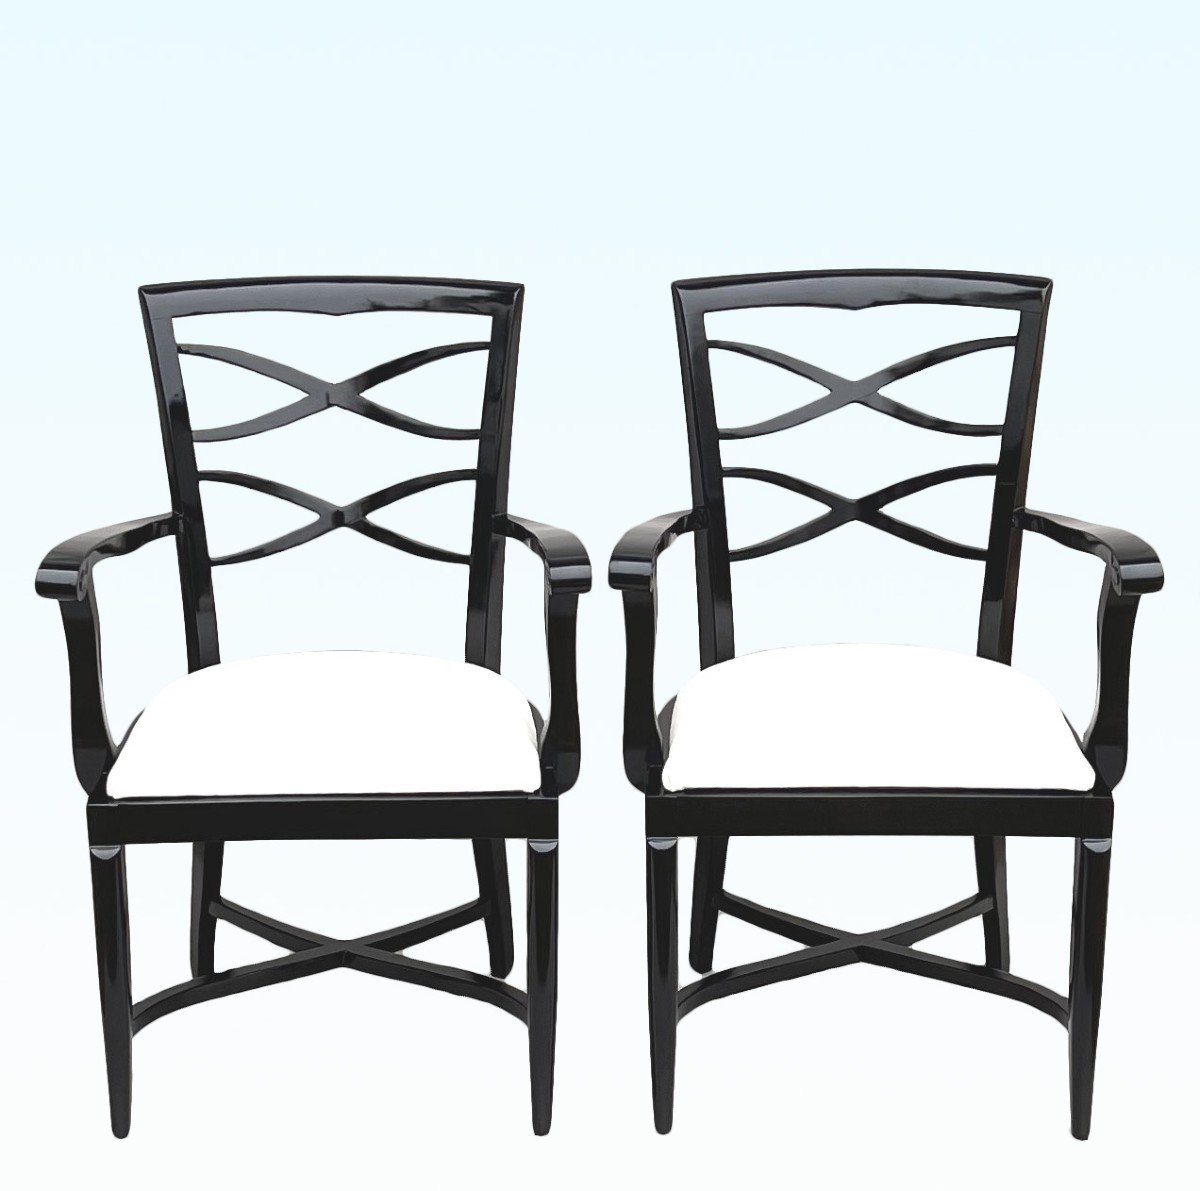 Baptistin Spade (1891-1969) Pair Of Armchairs In Black Lacquer And Ivory Leather